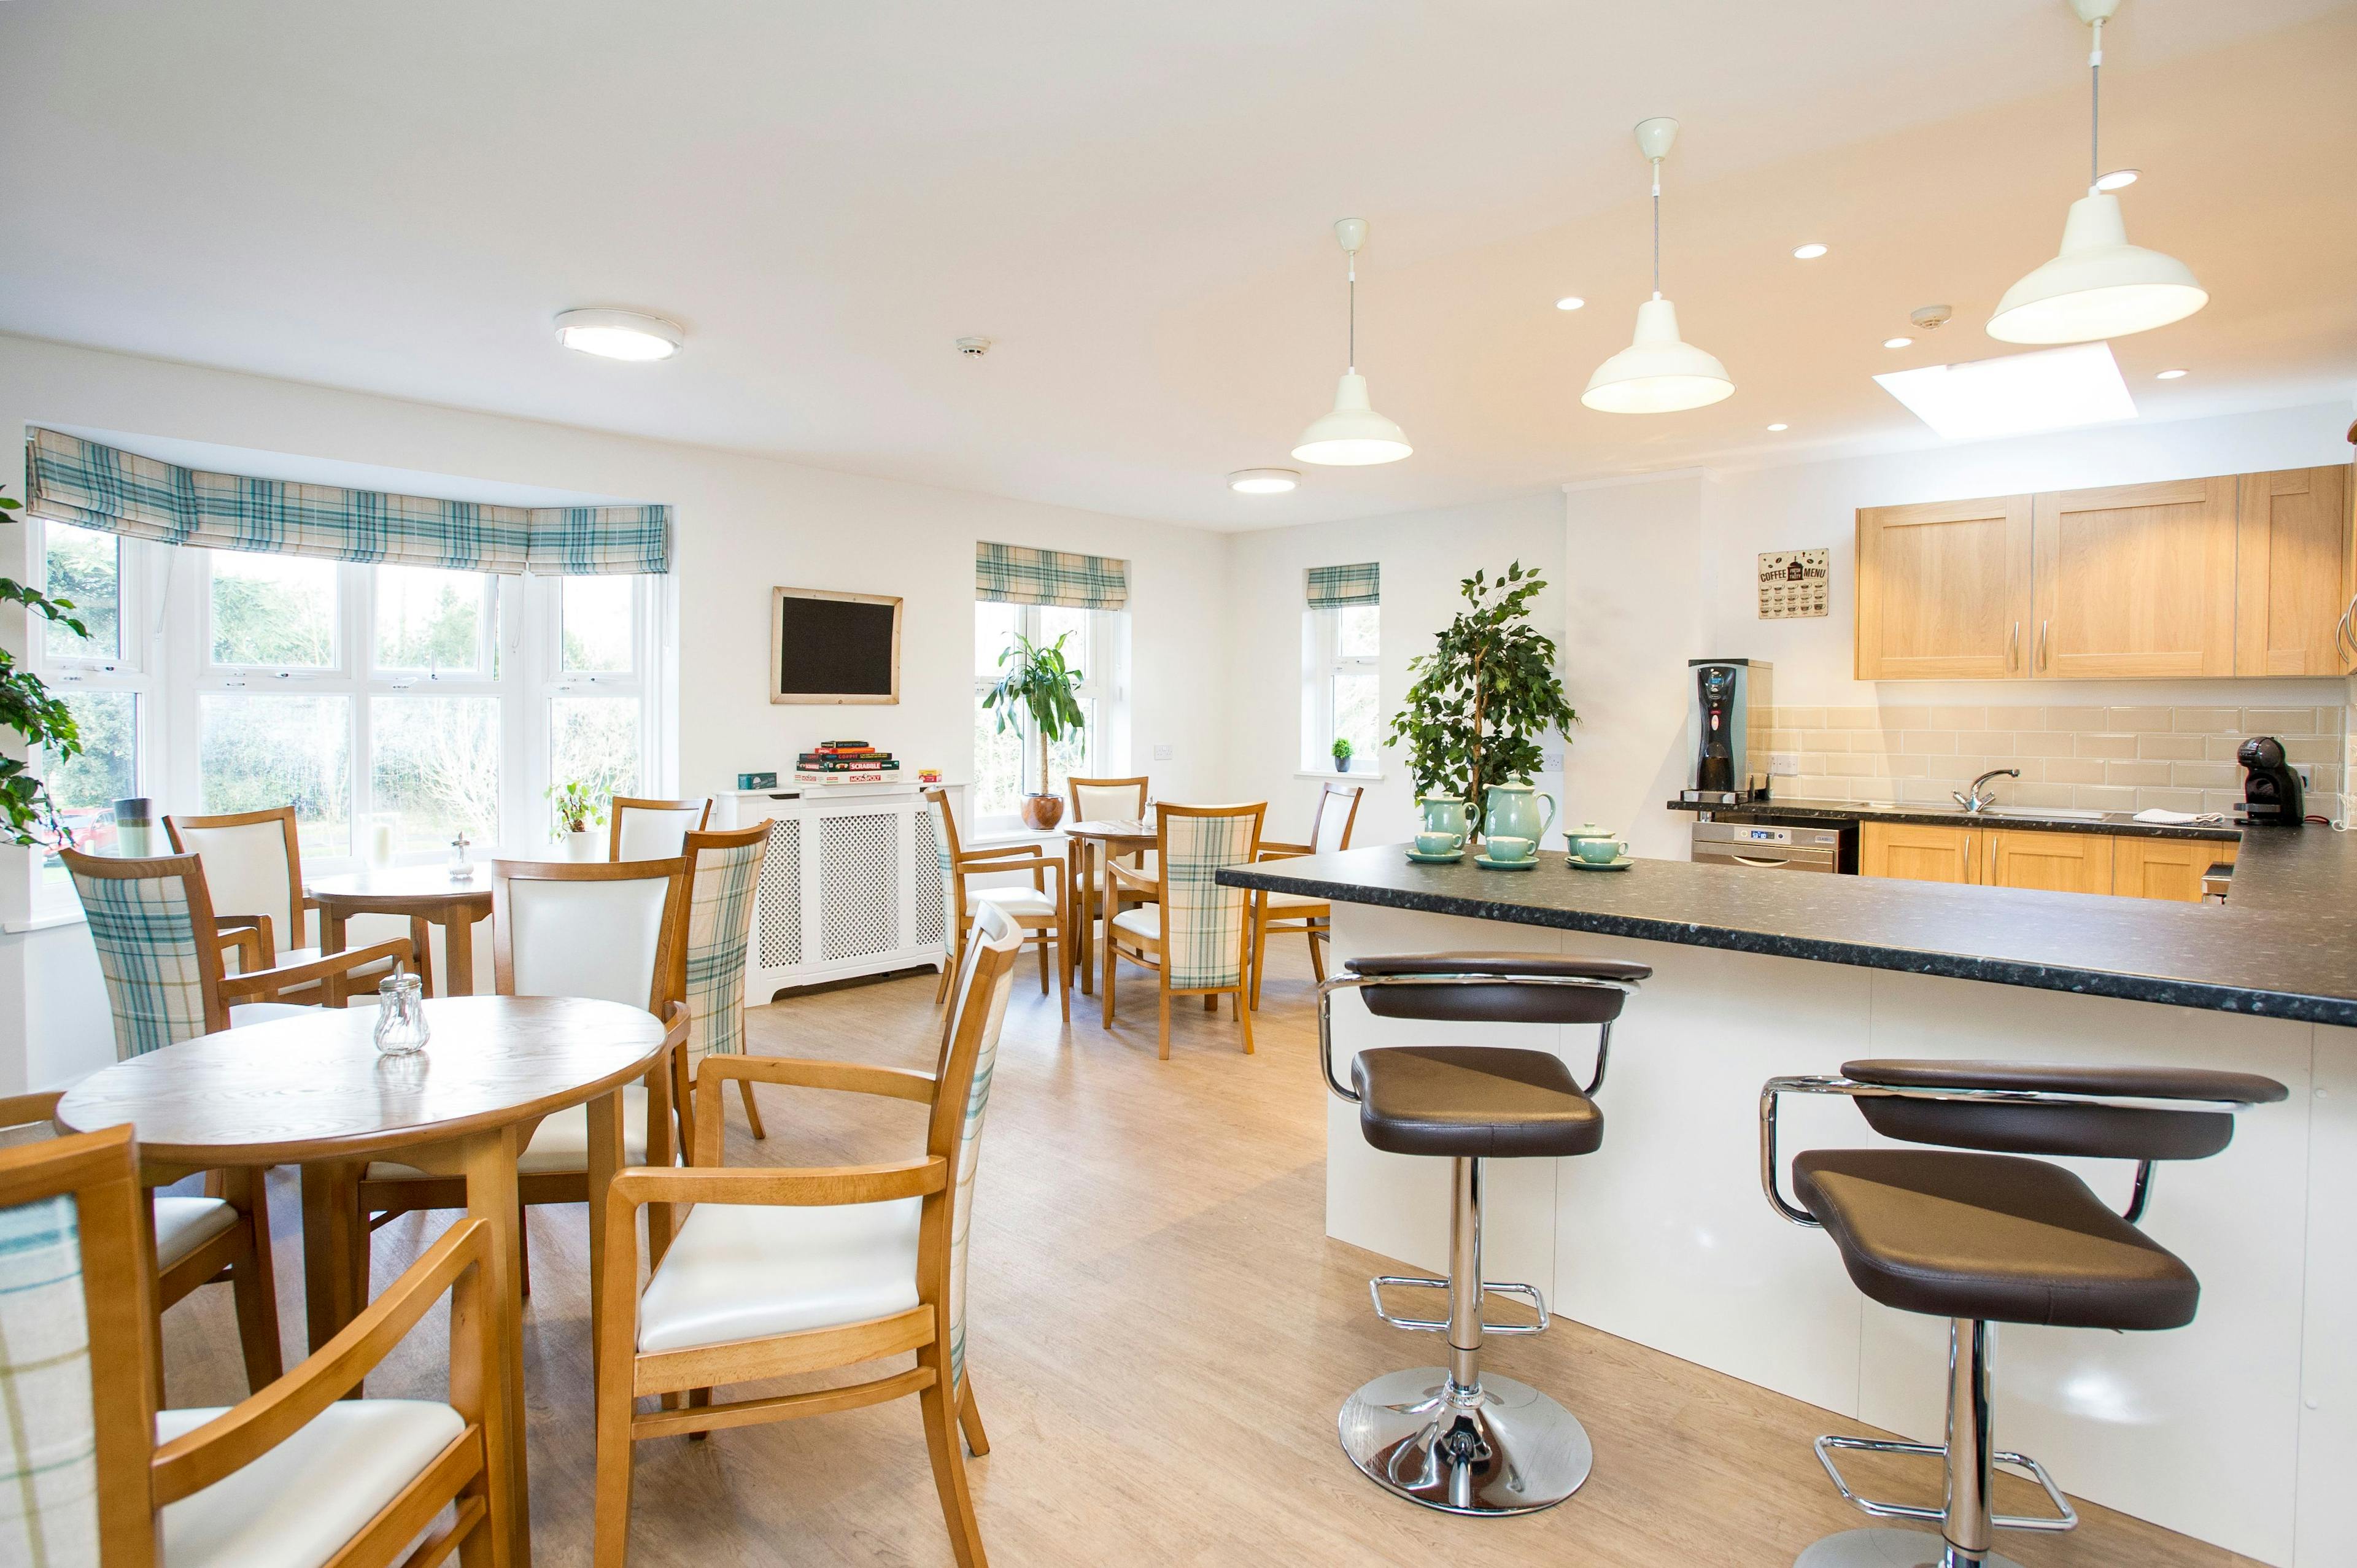 Dining Room  at Basingfield Court Care Home in Basingstoke, Hampshire